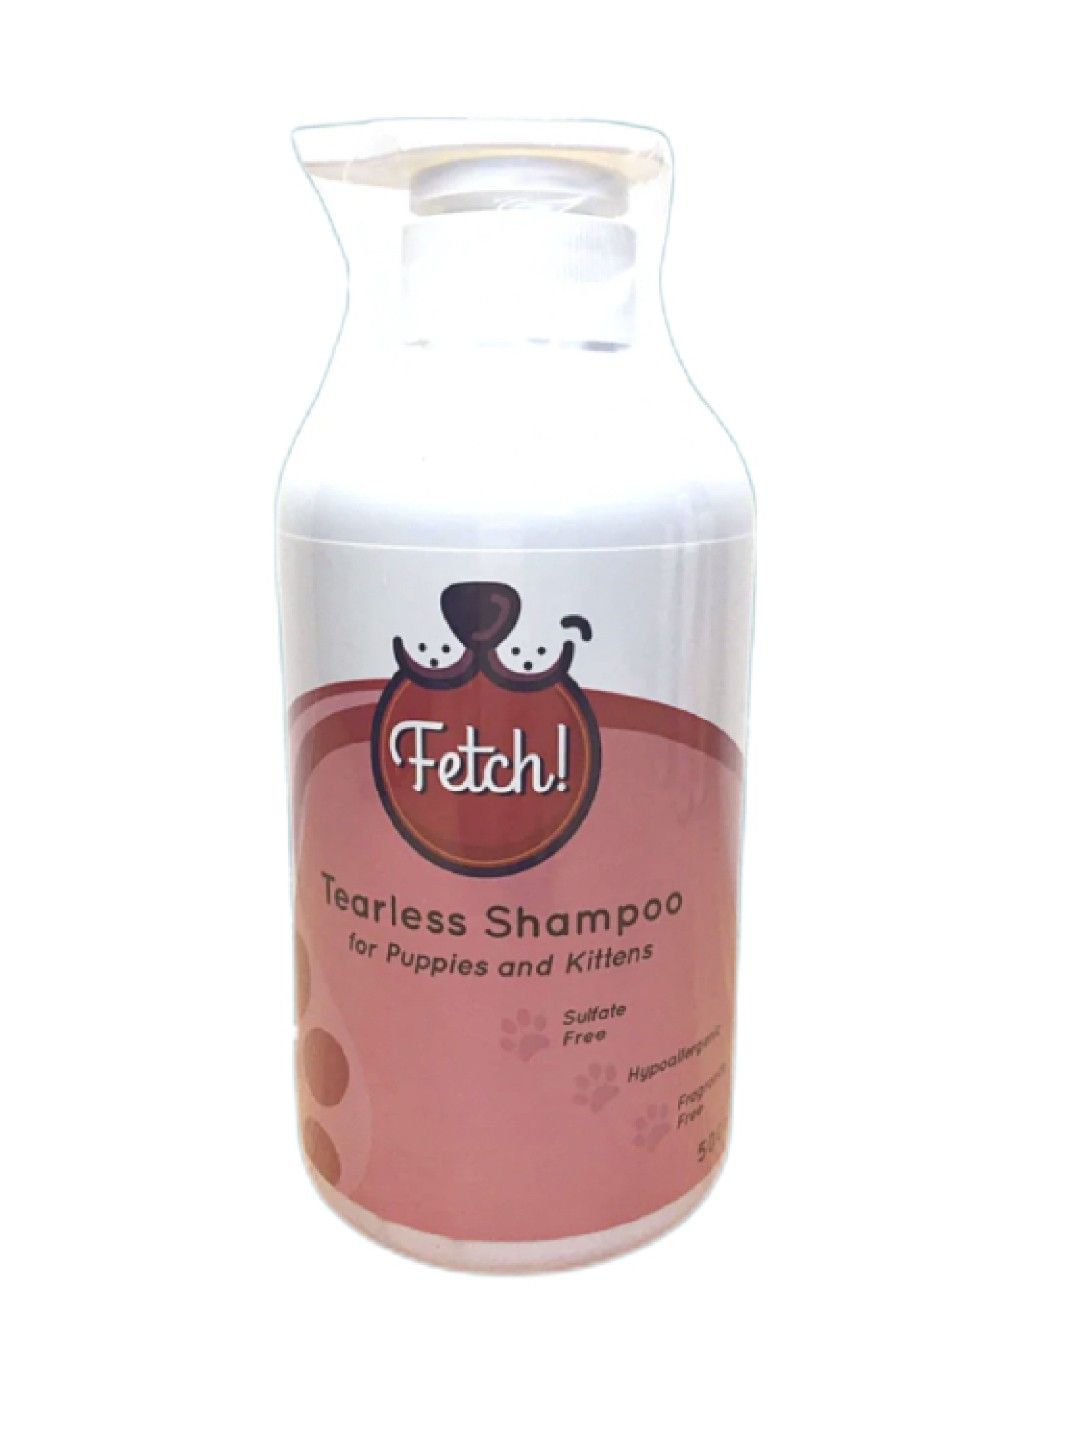 Fetch! Naturals Tearless Shampoo for Puppies and Kittens with Persimmon Extract (500ml)